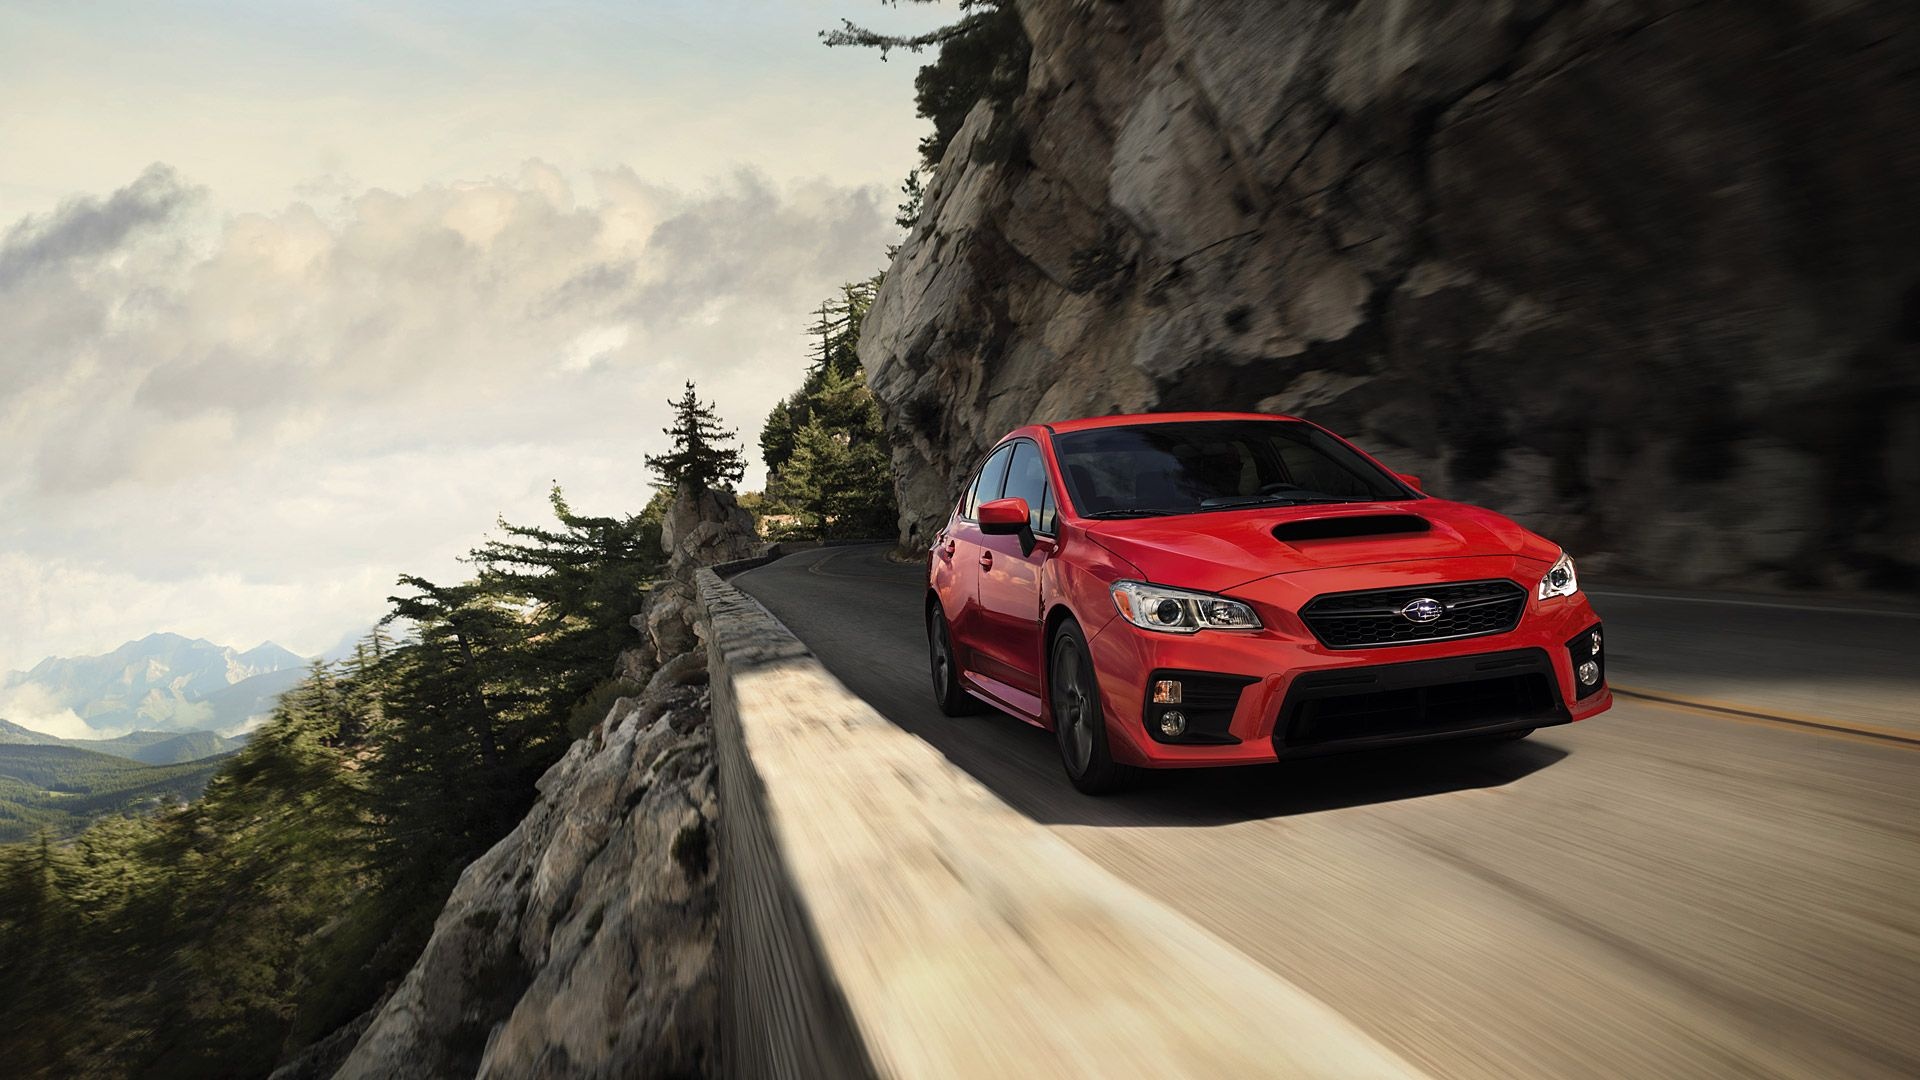 Subaru WRX backgrounds, Top free wallpapers, High-quality images, WRX enthusiasts, 1920x1080 Full HD Desktop